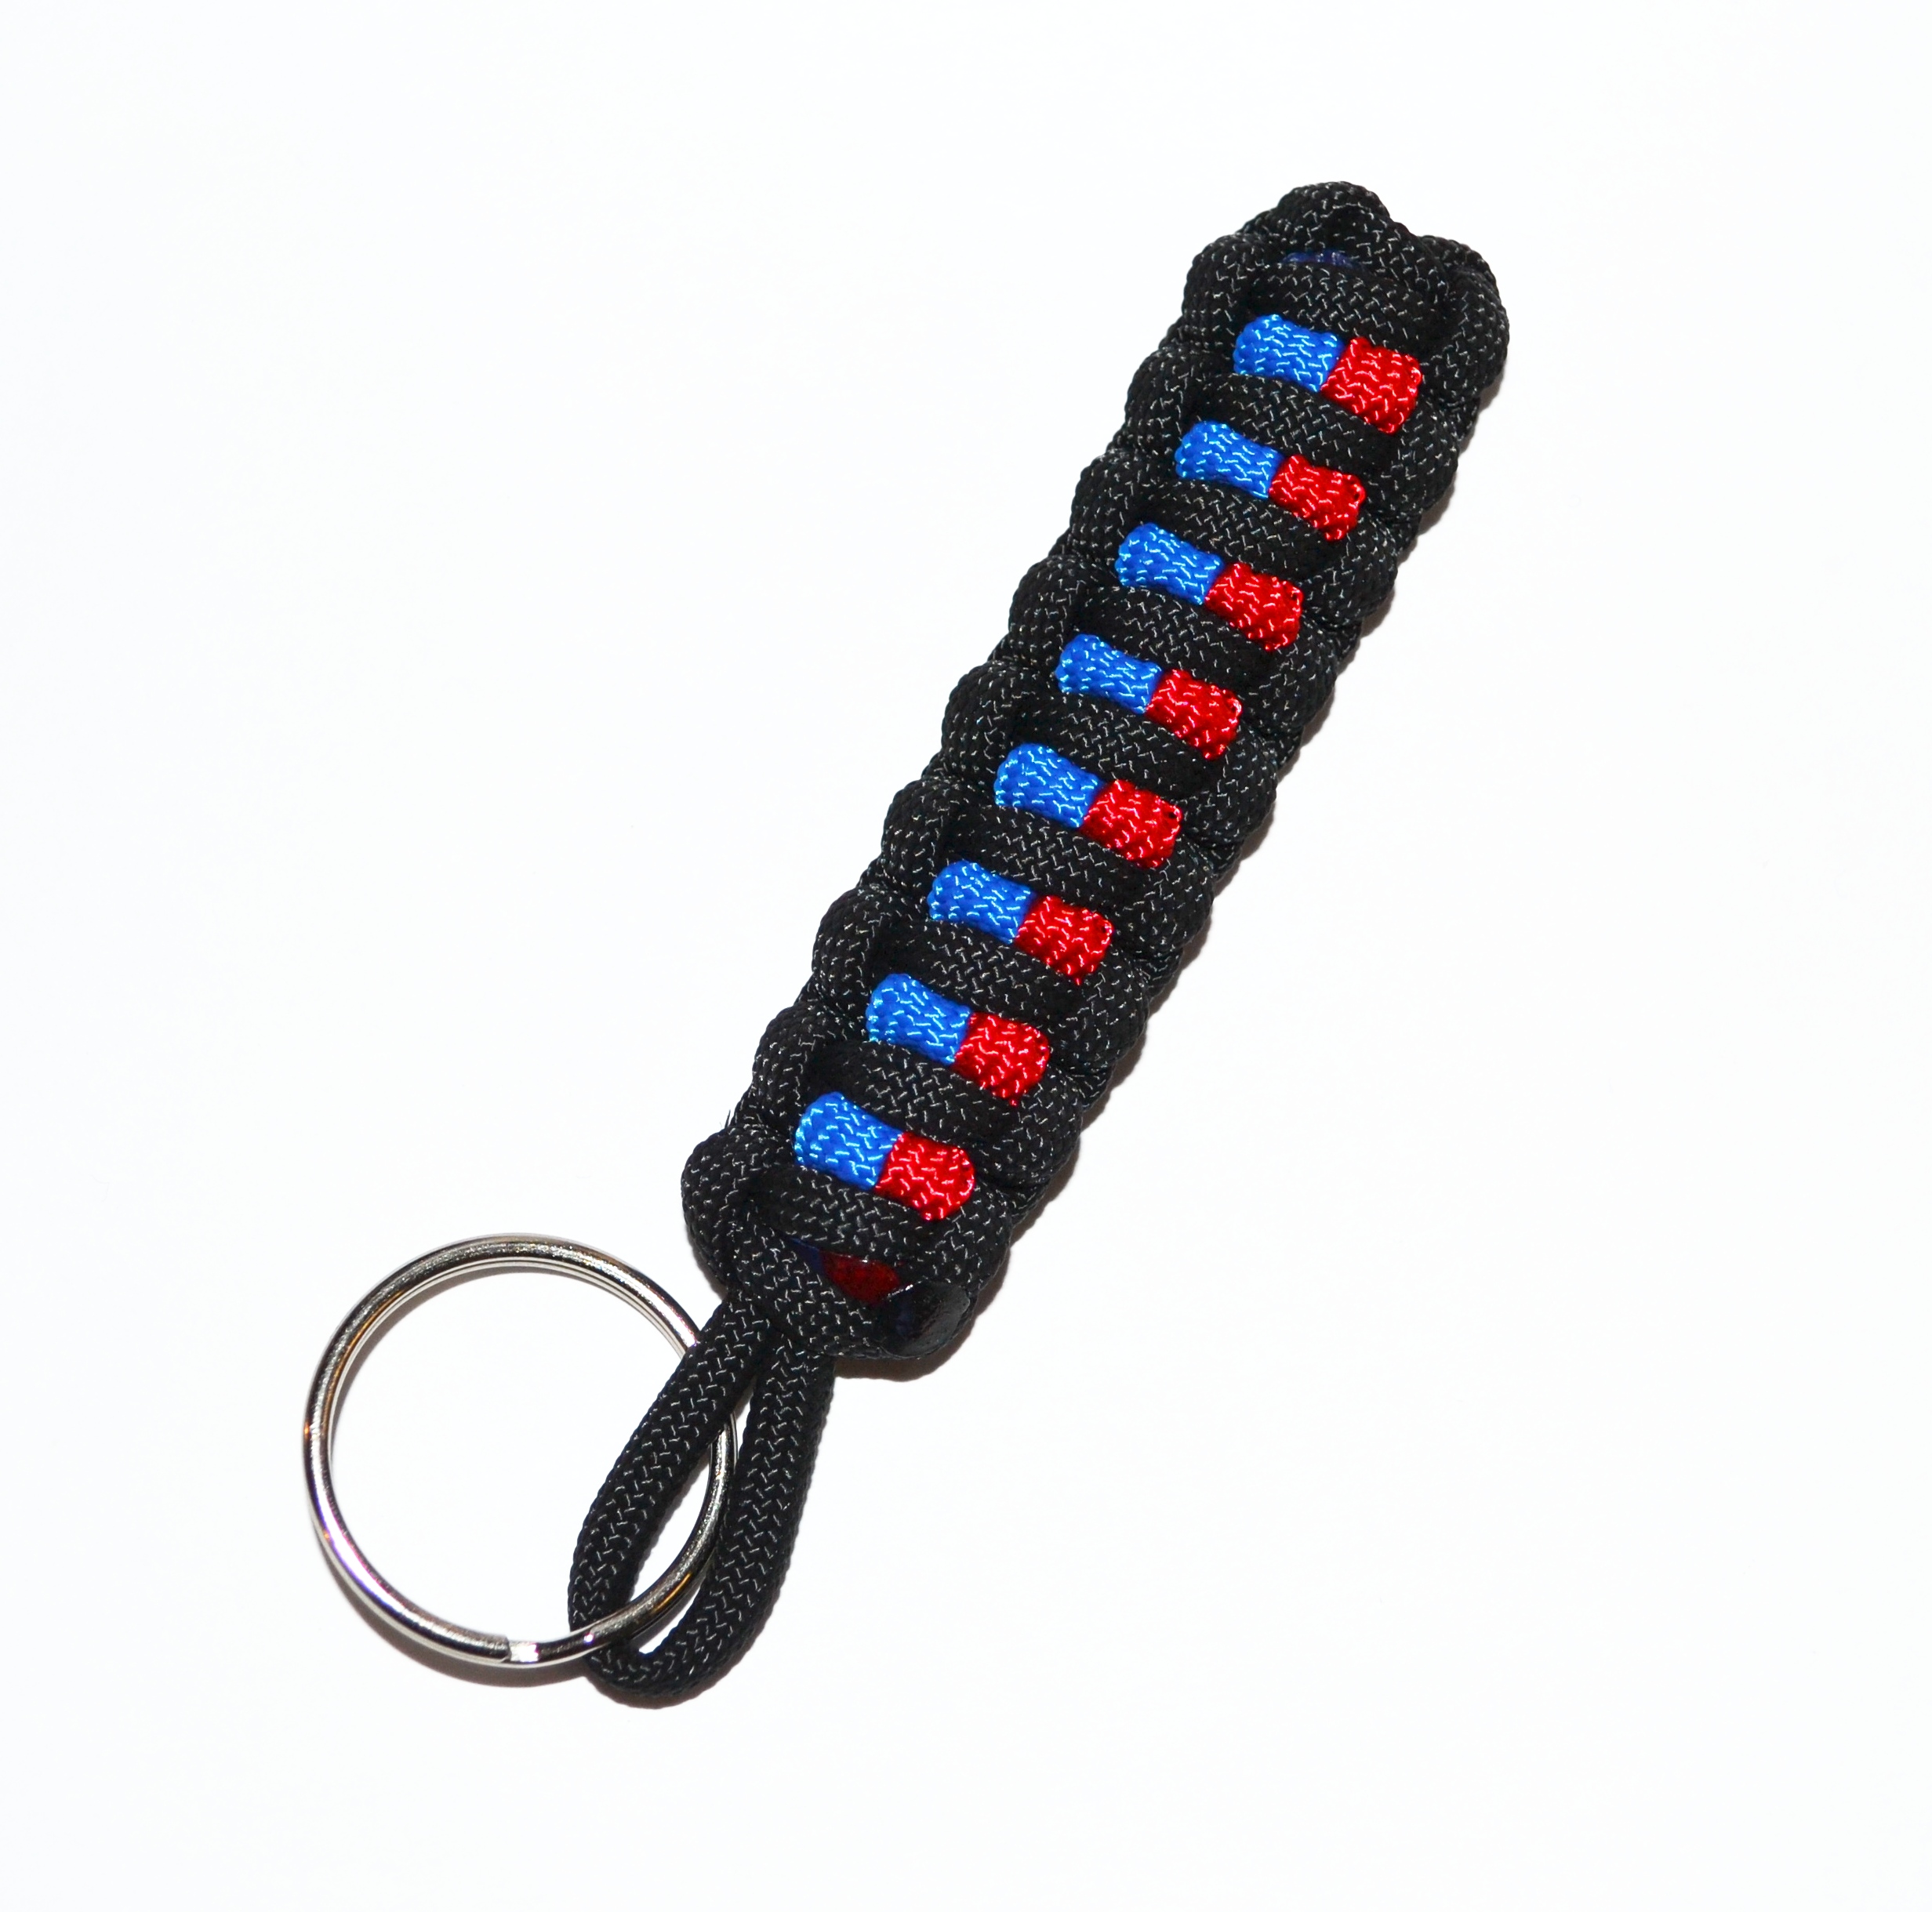 Thin Blue & Red Line Paracord Survival Key Chain